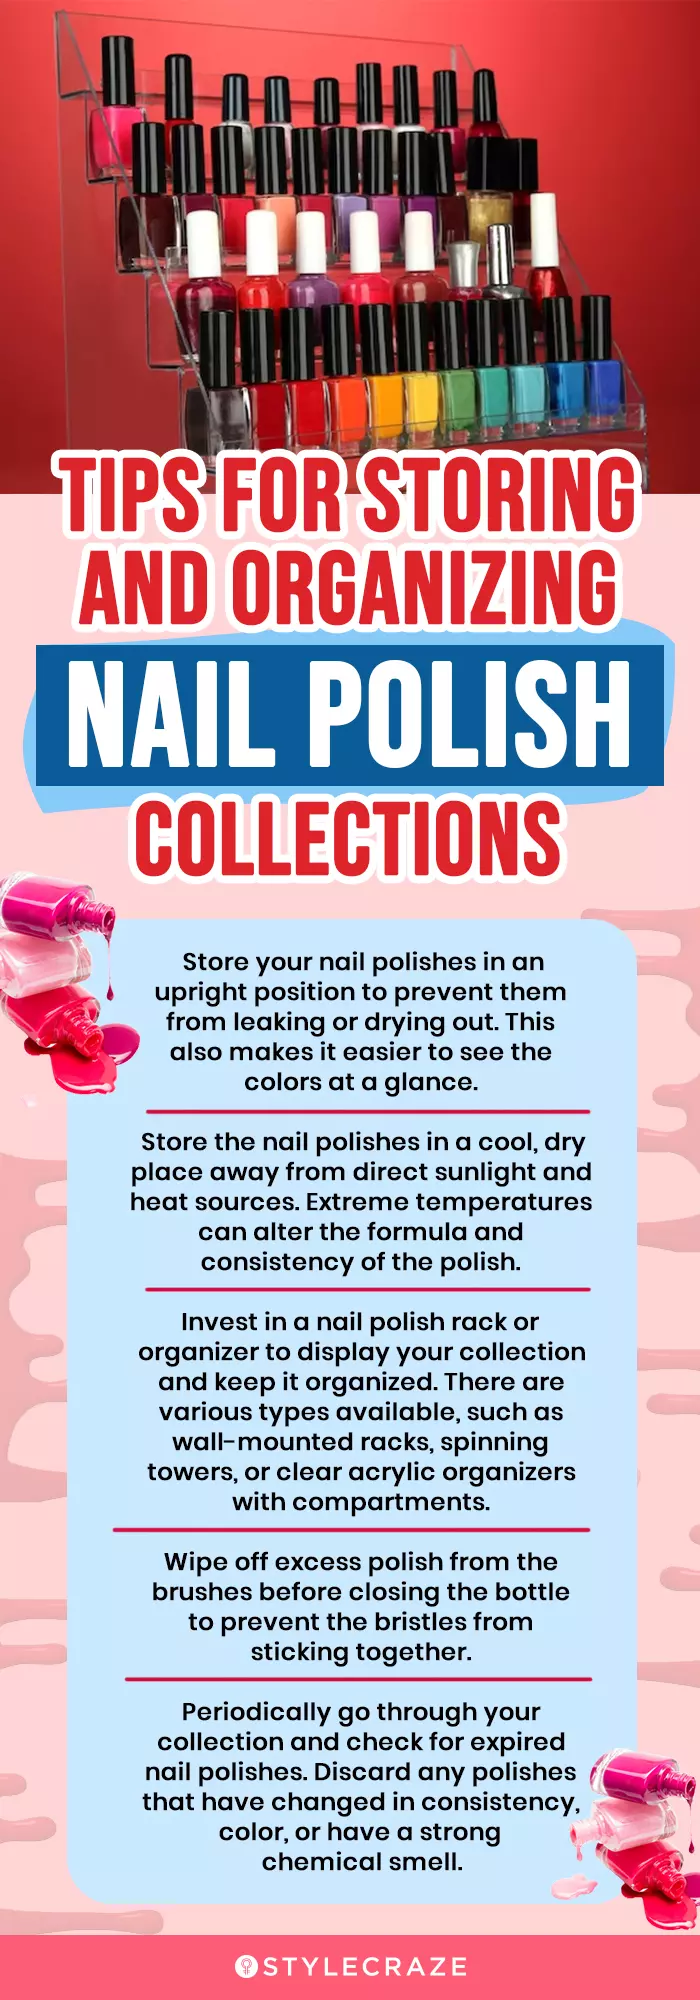 Tips For Storing And Organizing Nail Polish Collections (infographic)